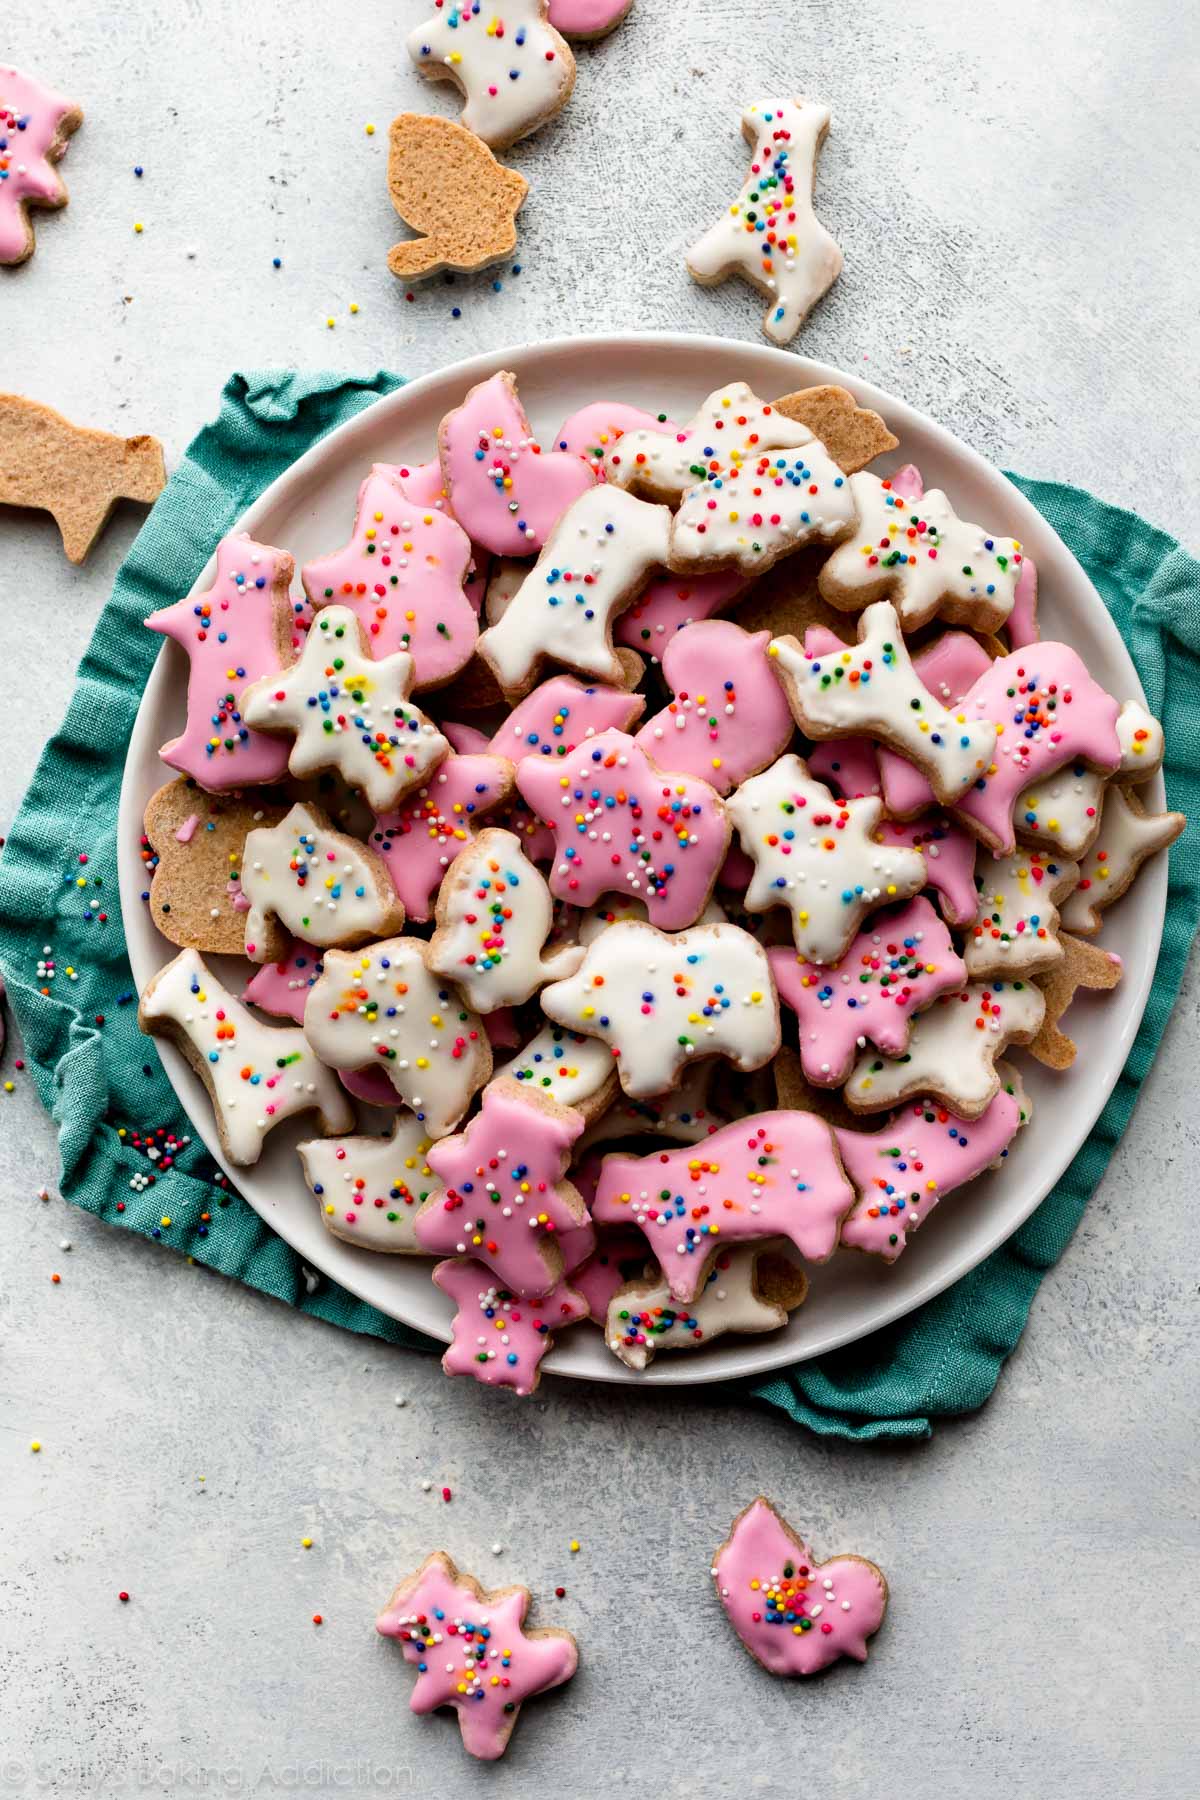 plate of animal cracker cookies with pink and white icing